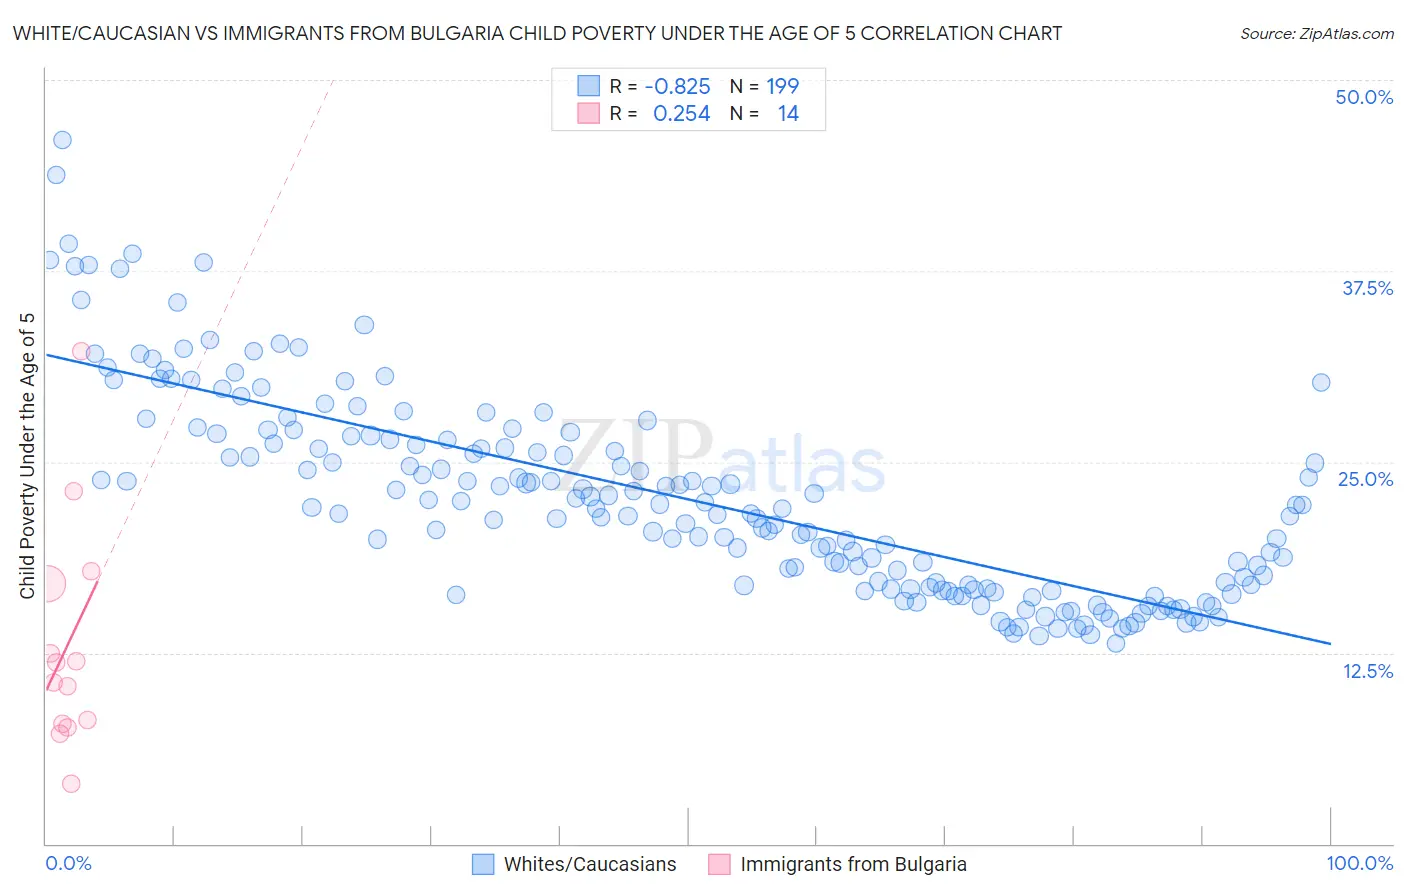 White/Caucasian vs Immigrants from Bulgaria Child Poverty Under the Age of 5